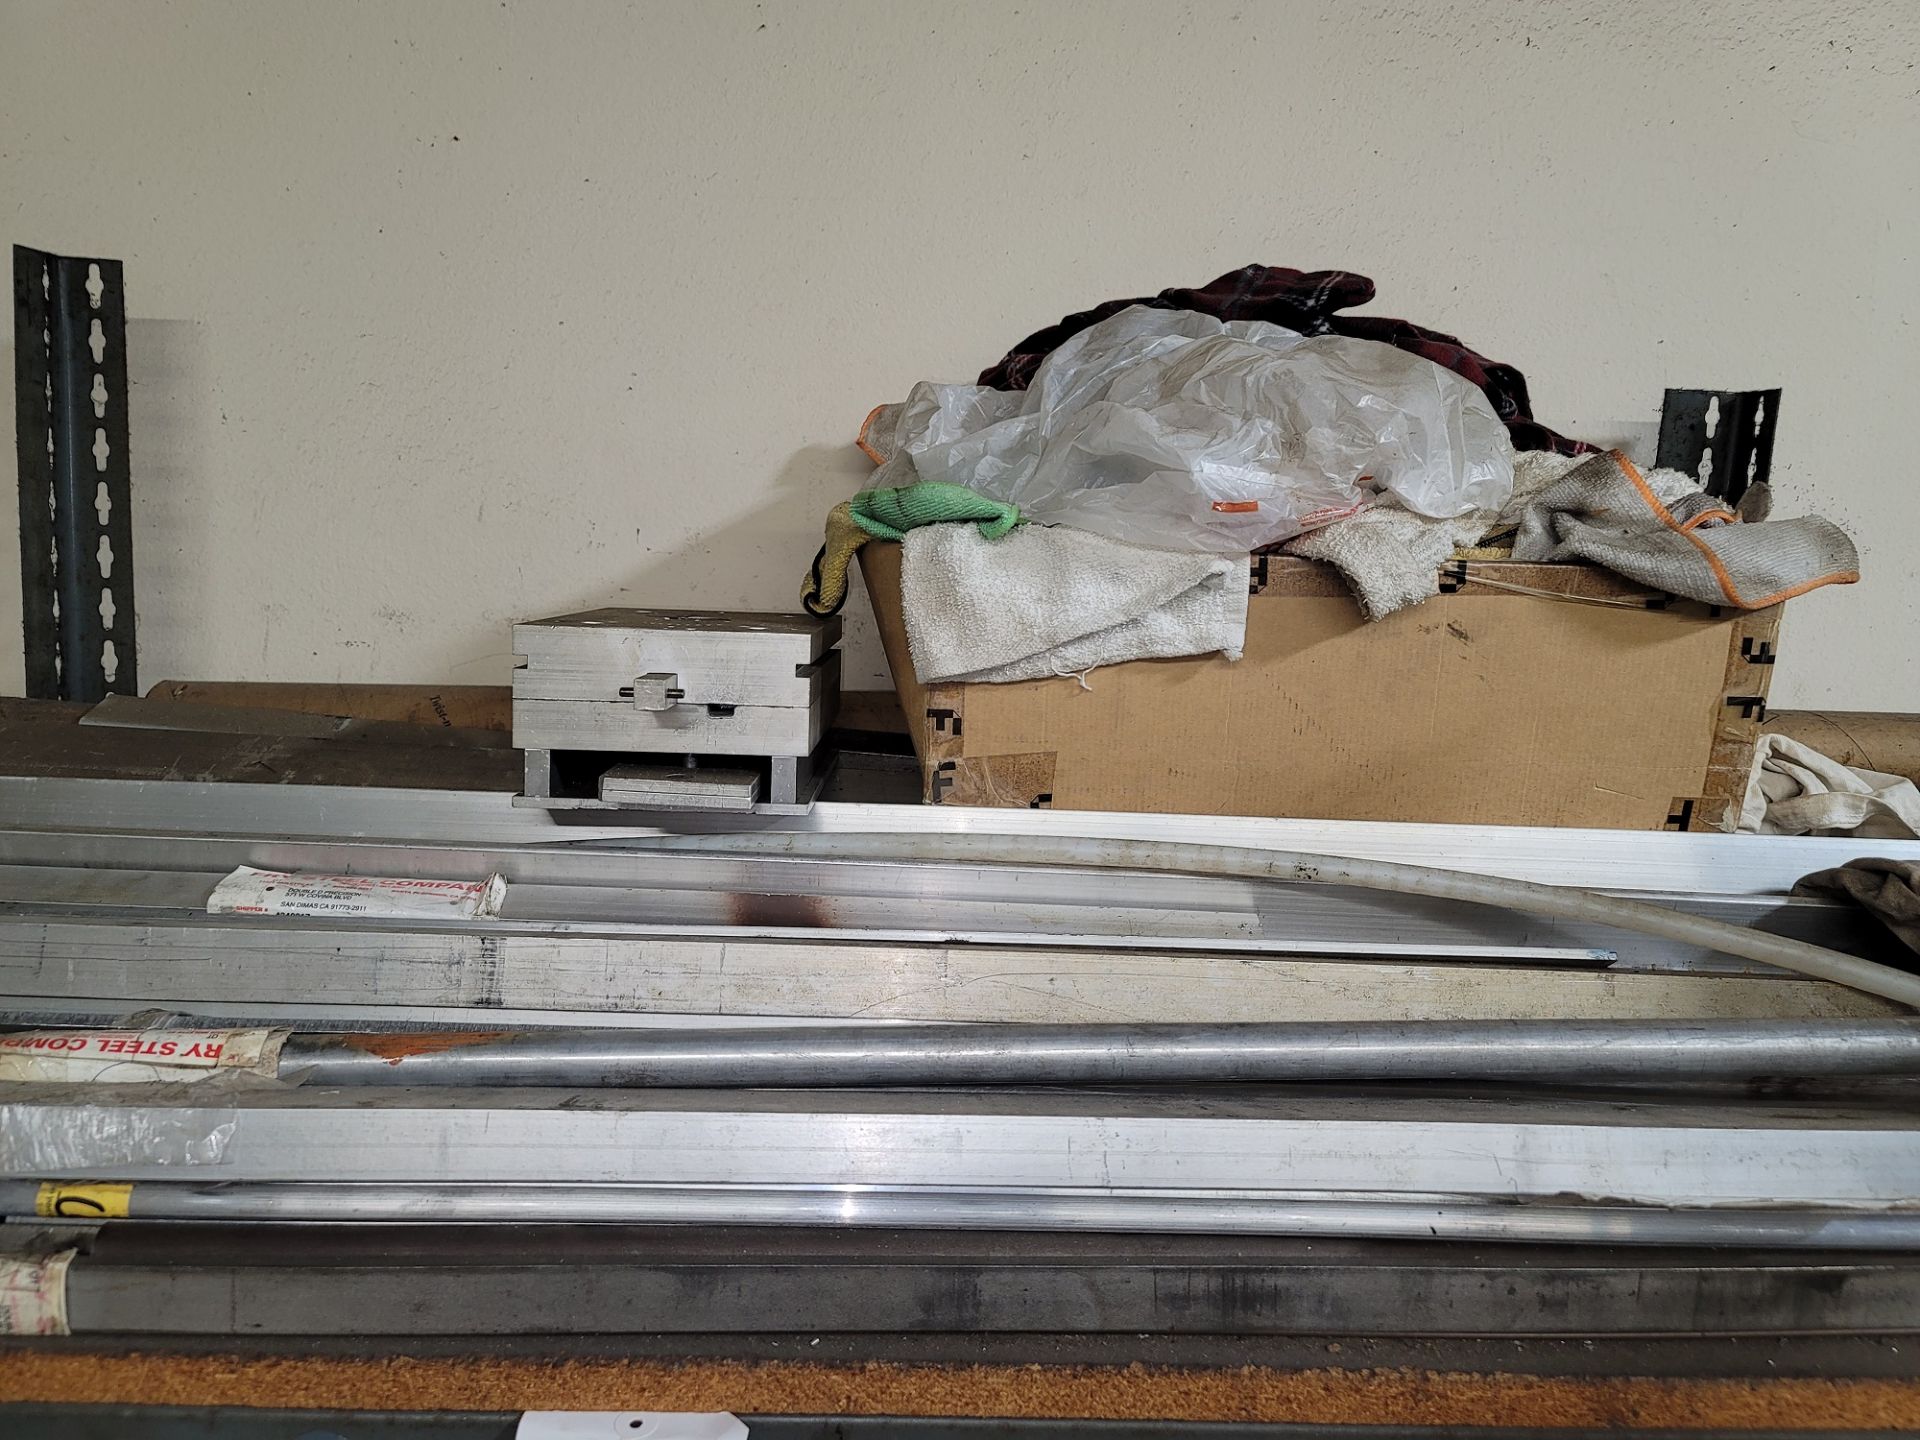 LOT - SHELF UNIT, 4' X 2' X 7'HT, W/ CONTENTS: ALUMINUM, STEEL, STAINLESS STEEL, TOOL STEEL, - Image 5 of 5